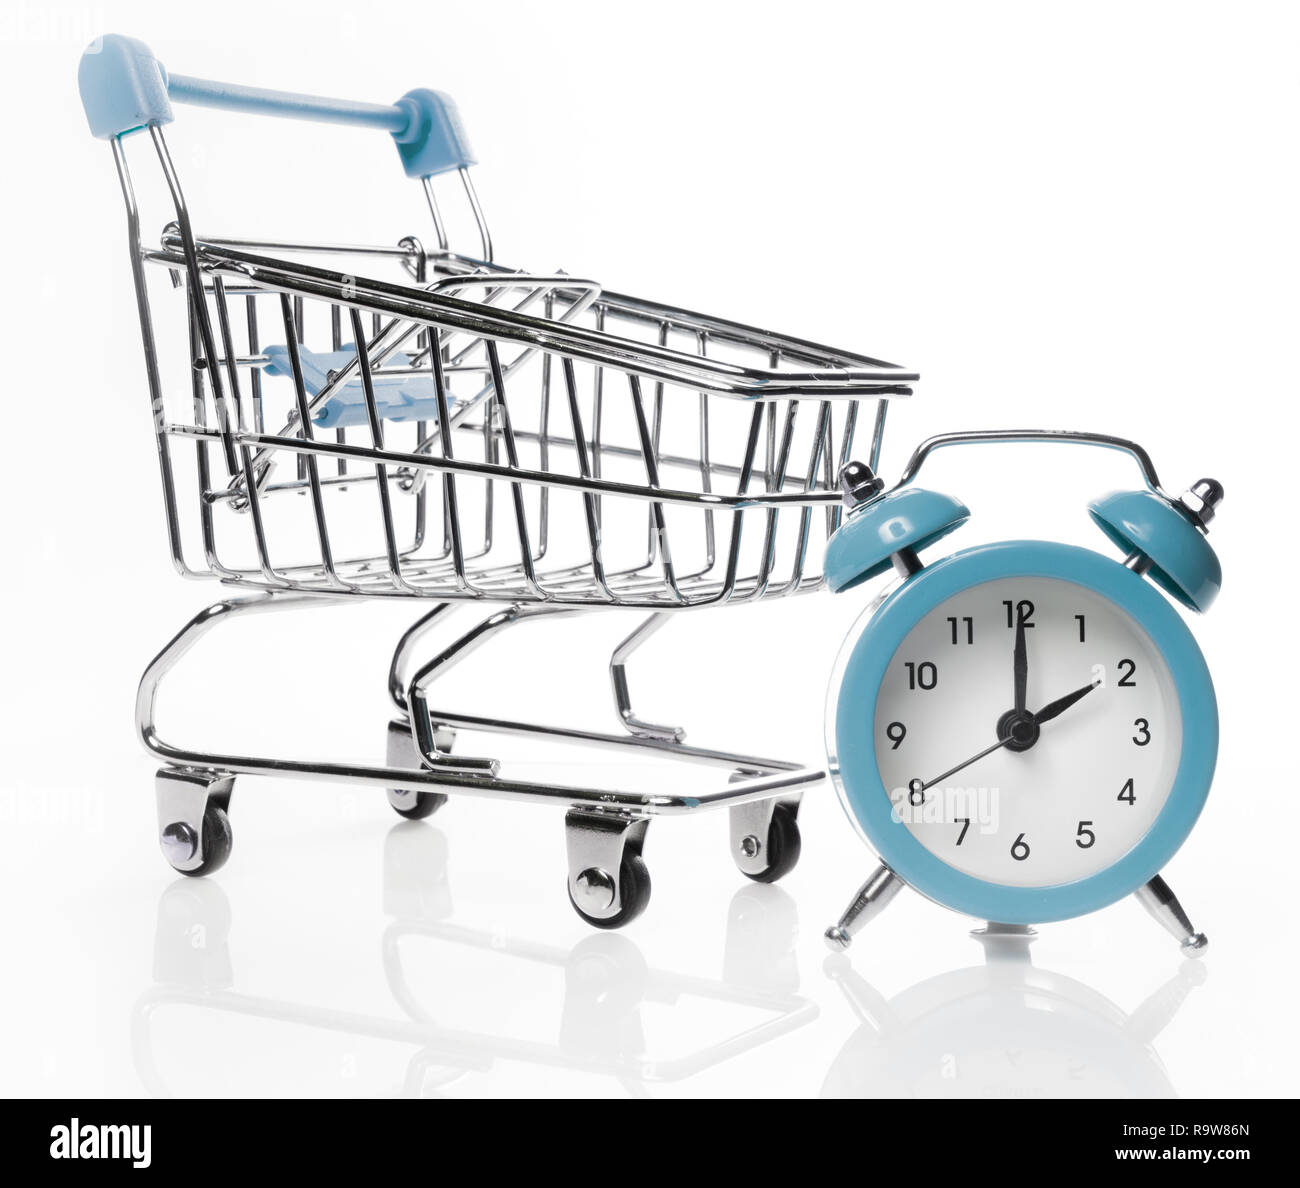 Time to buy. Watch and trolley from the store for shopping. Stock Photo